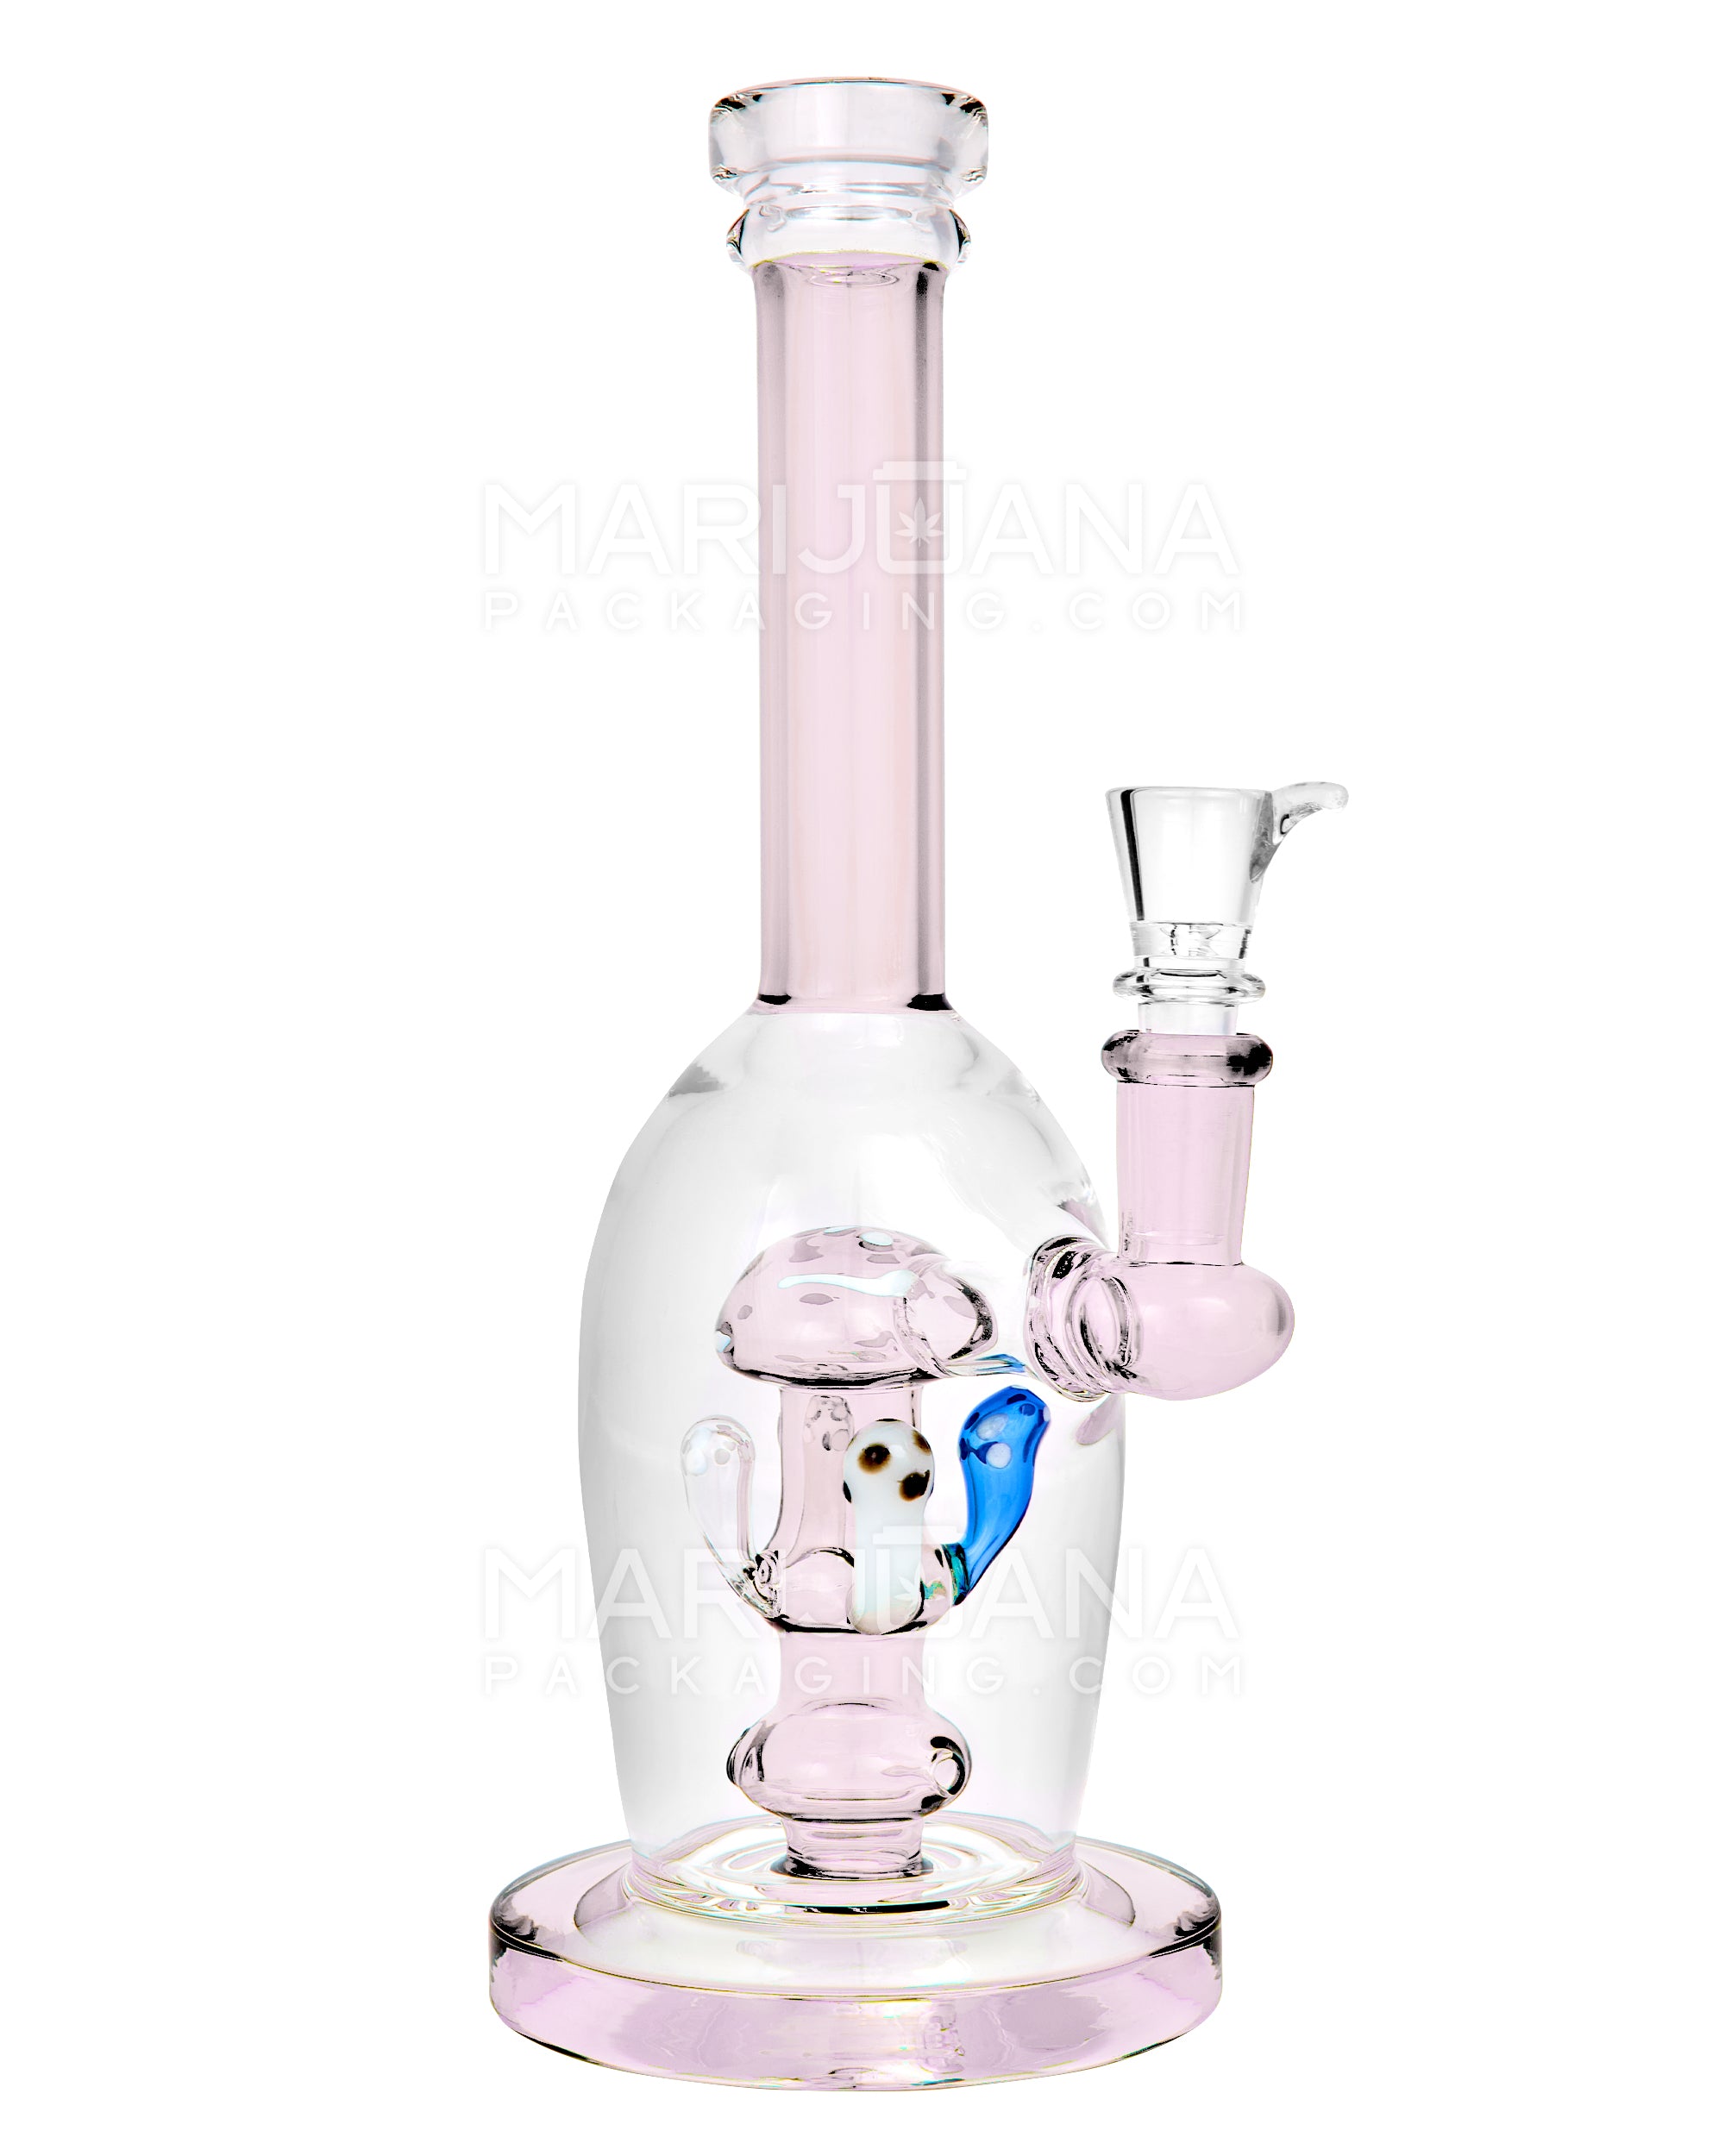 Straight Neck Mushroom Perc Glass Egg Water Pipe w/ Thick Base | 10.5in Tall - 14mm Bowl - Pink - 1